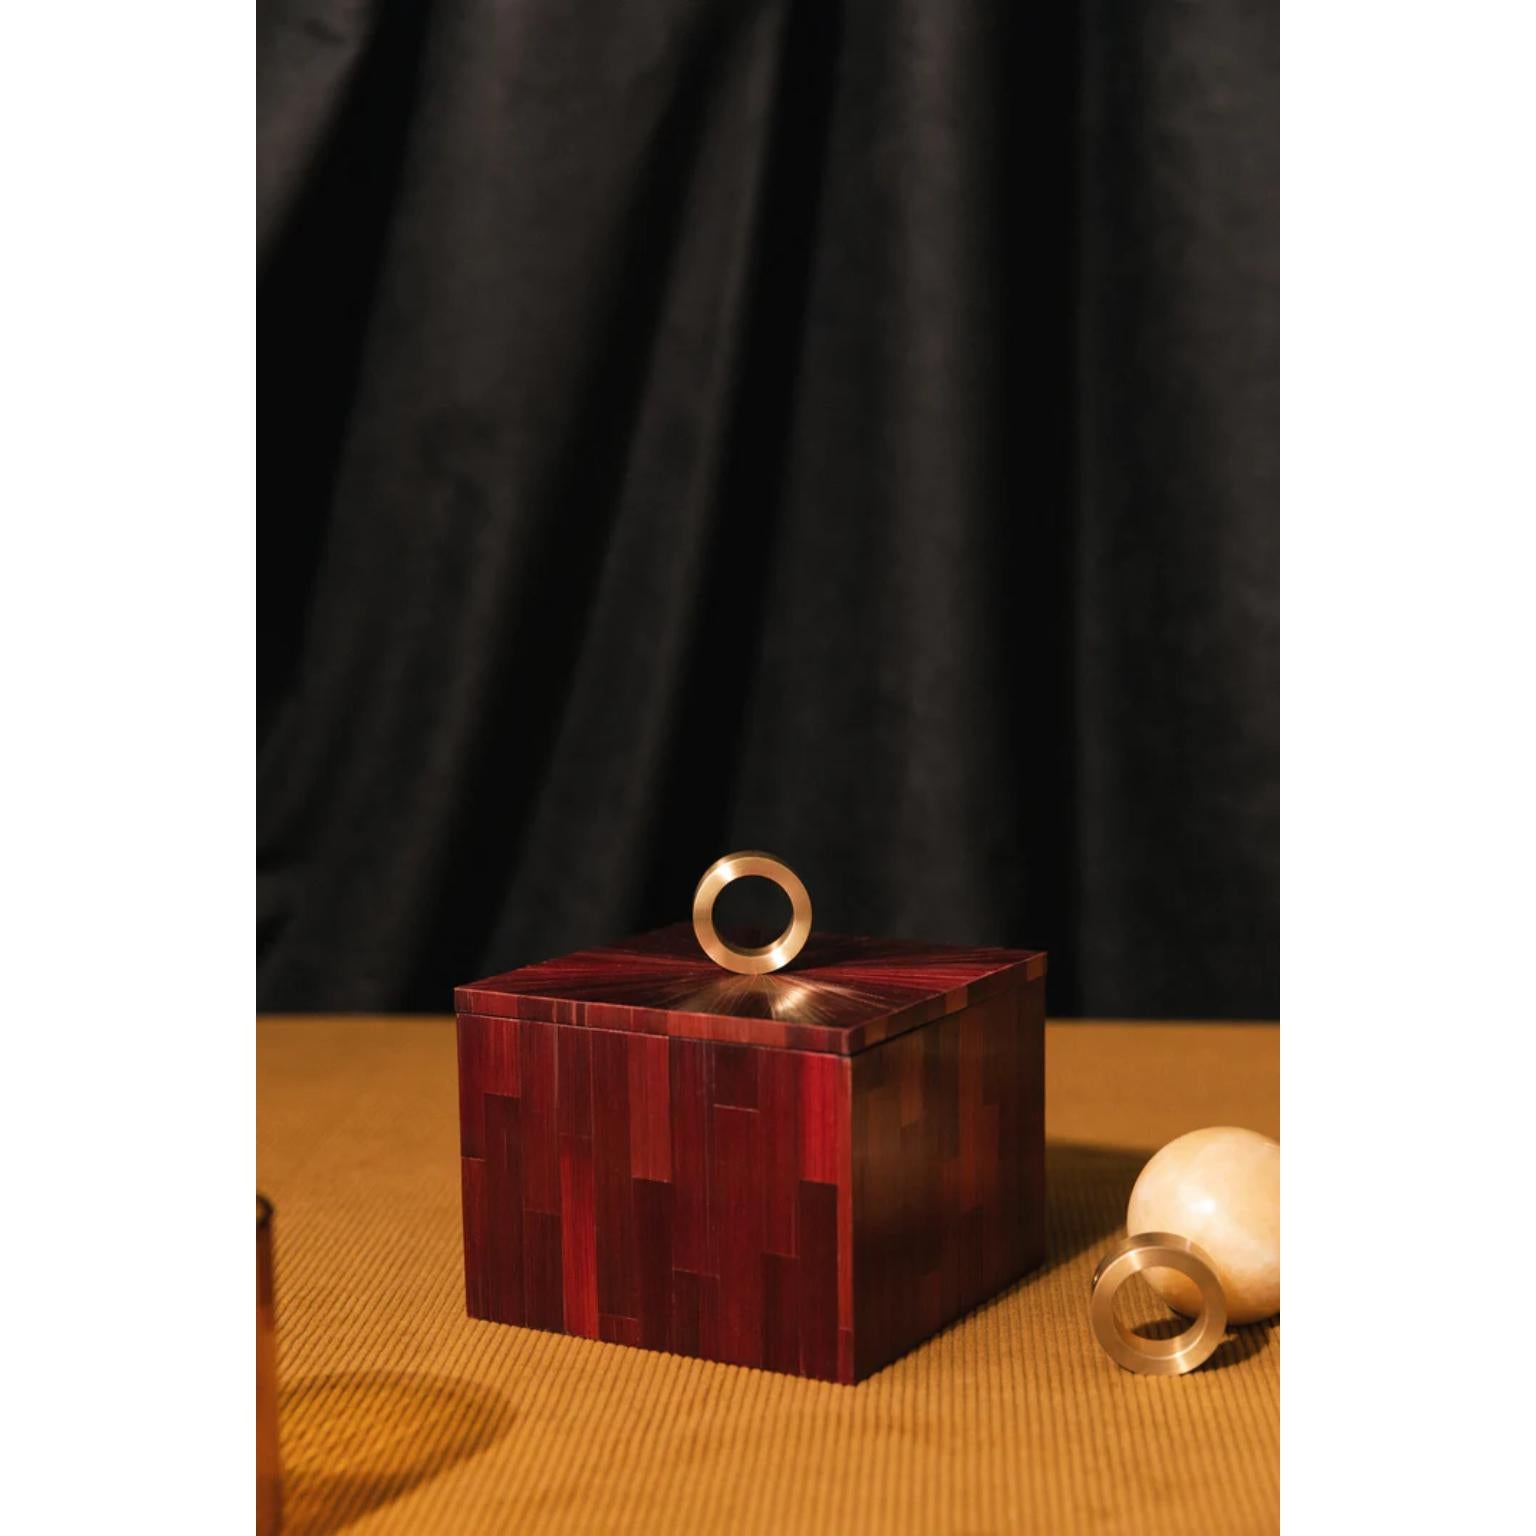 Decorative Box 02 by Ruda Studio
Dimensions: D 12 x W 12 x H 9,5 cm.
Materials: MDF, painted rye straw and brass.
Weight: 2 kg.

Available in individuals colors. Please contact us. 

Design brand RUDA Studio was founded in 2017 by Oleksandra Rudenko